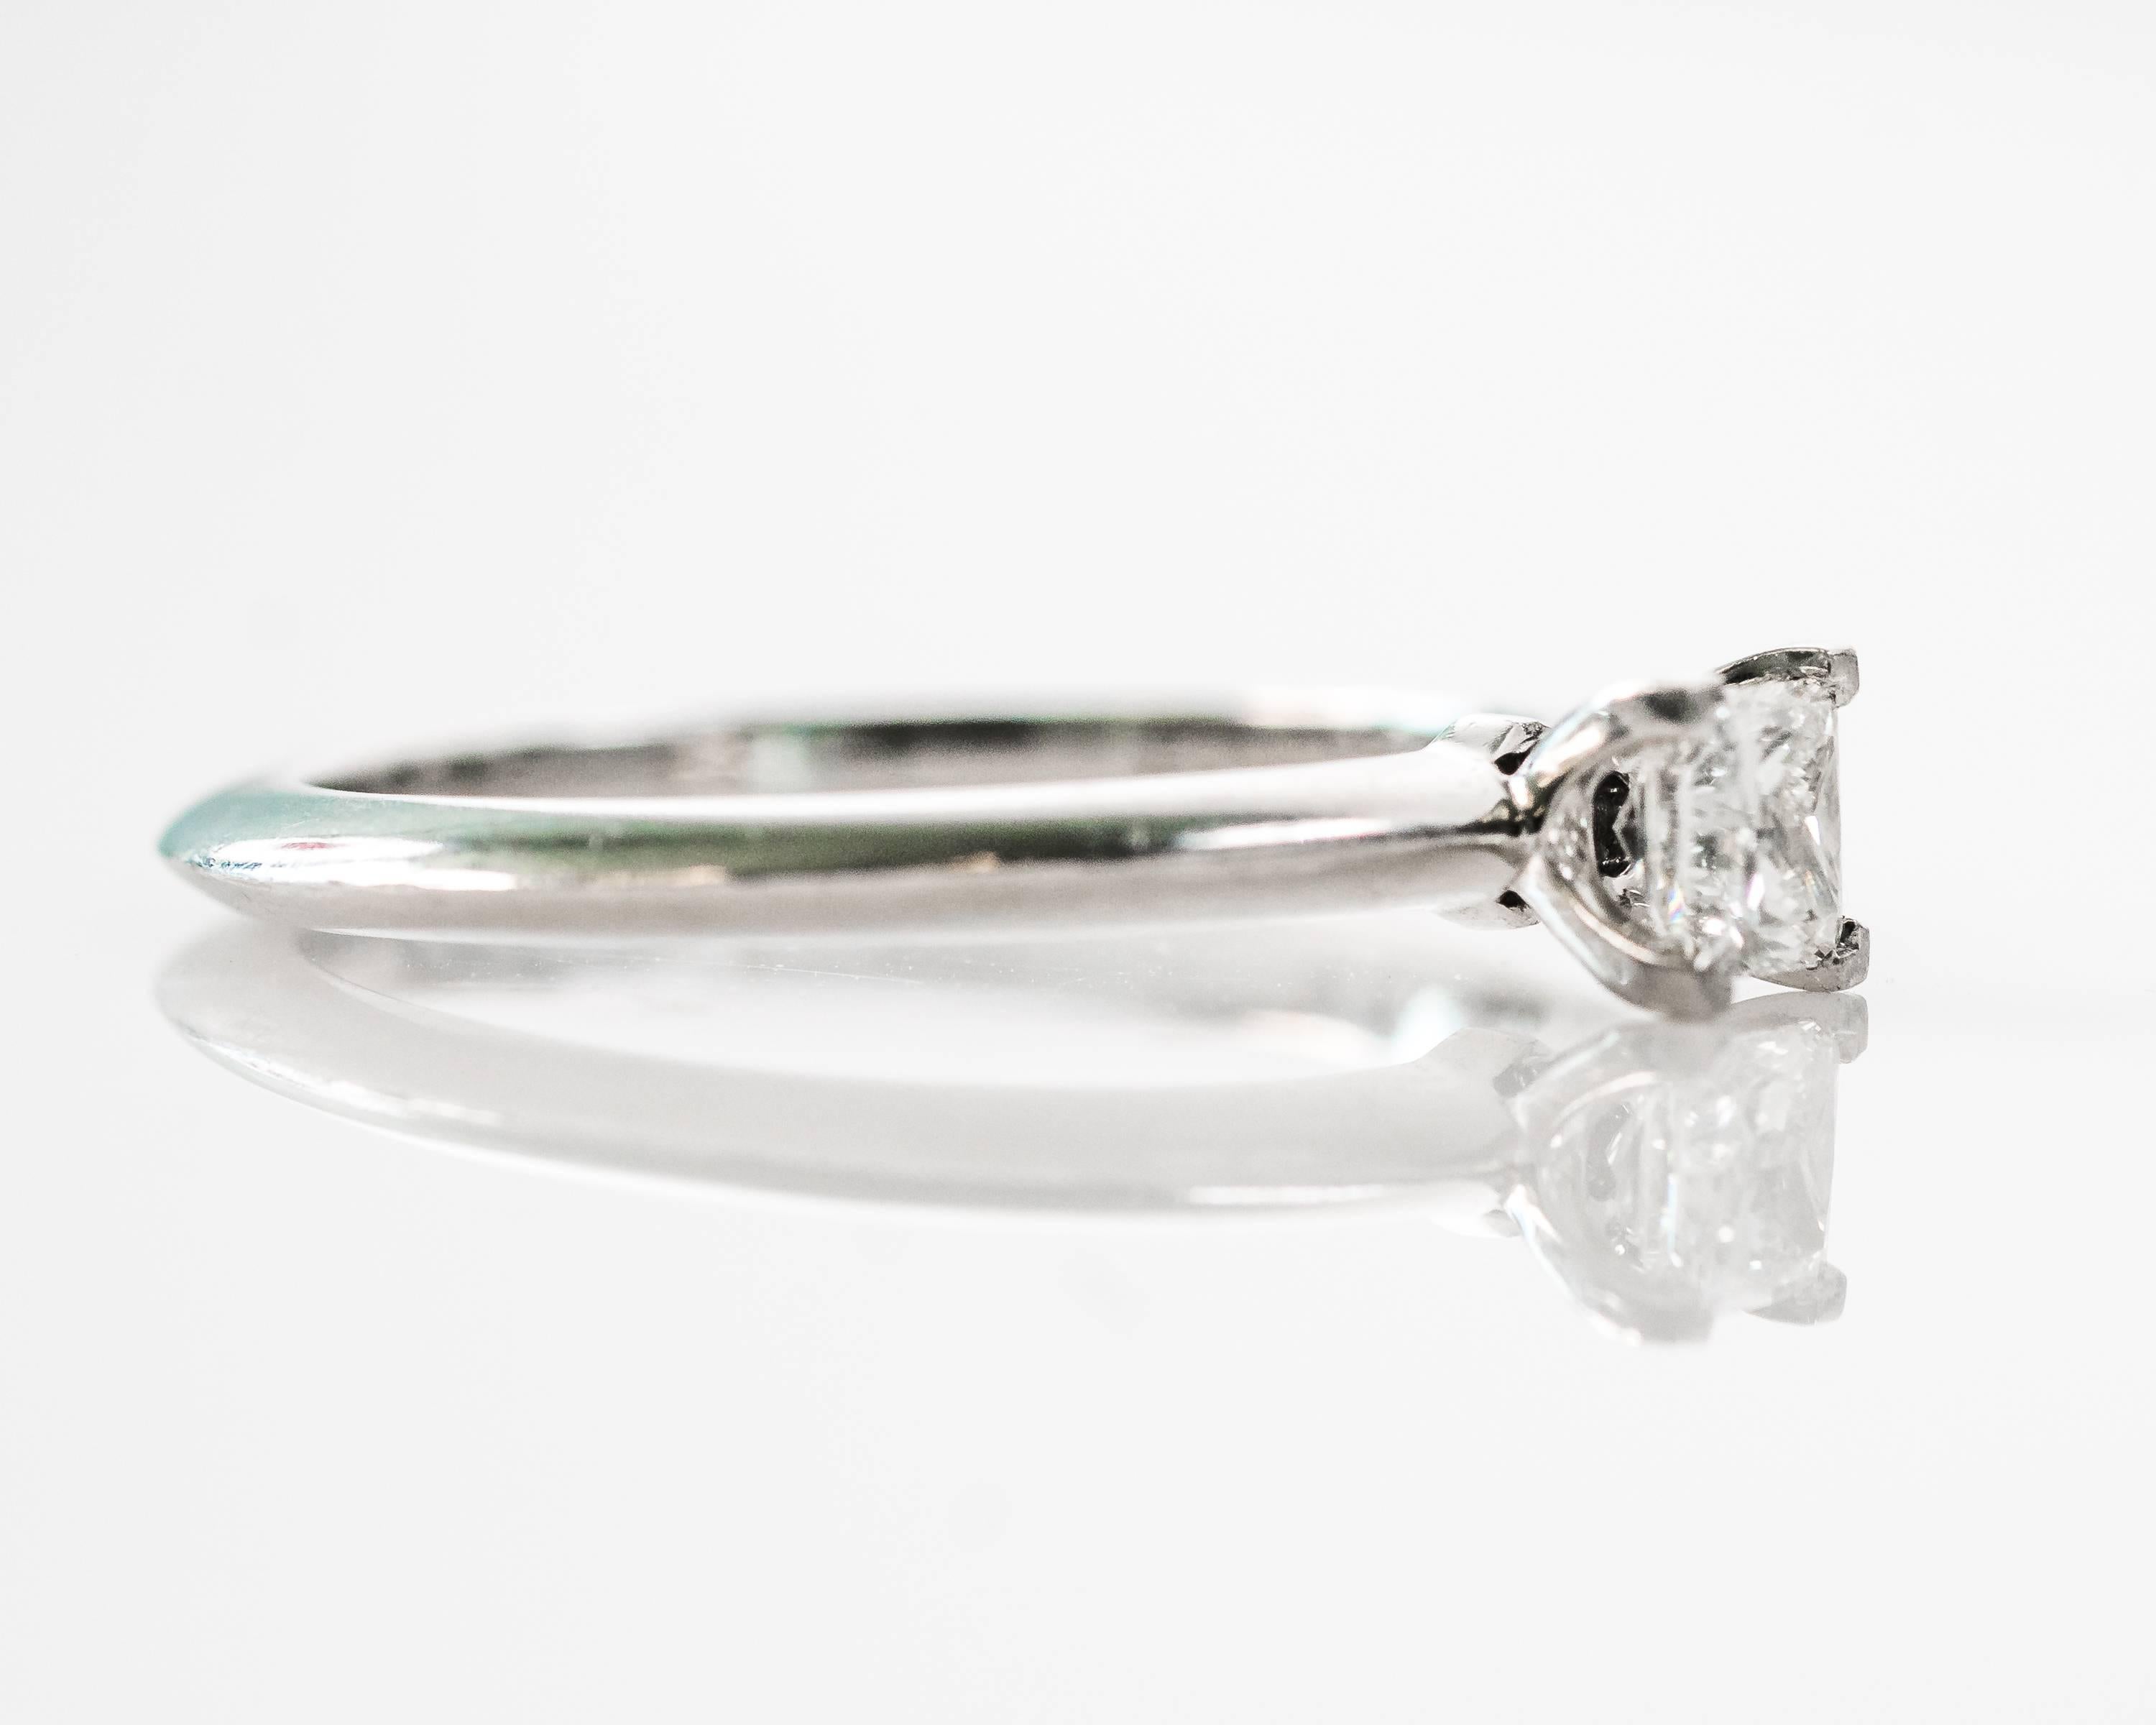 This Tiffany and Co. 0.33 carat Princess cut Diamond solitaire Engagement Ring features an F color, VS clarity diamond that sits flush in a four prong setting. 

Featuring a knife-edge Platinum band, this sweet ring comes with the original Tiffany